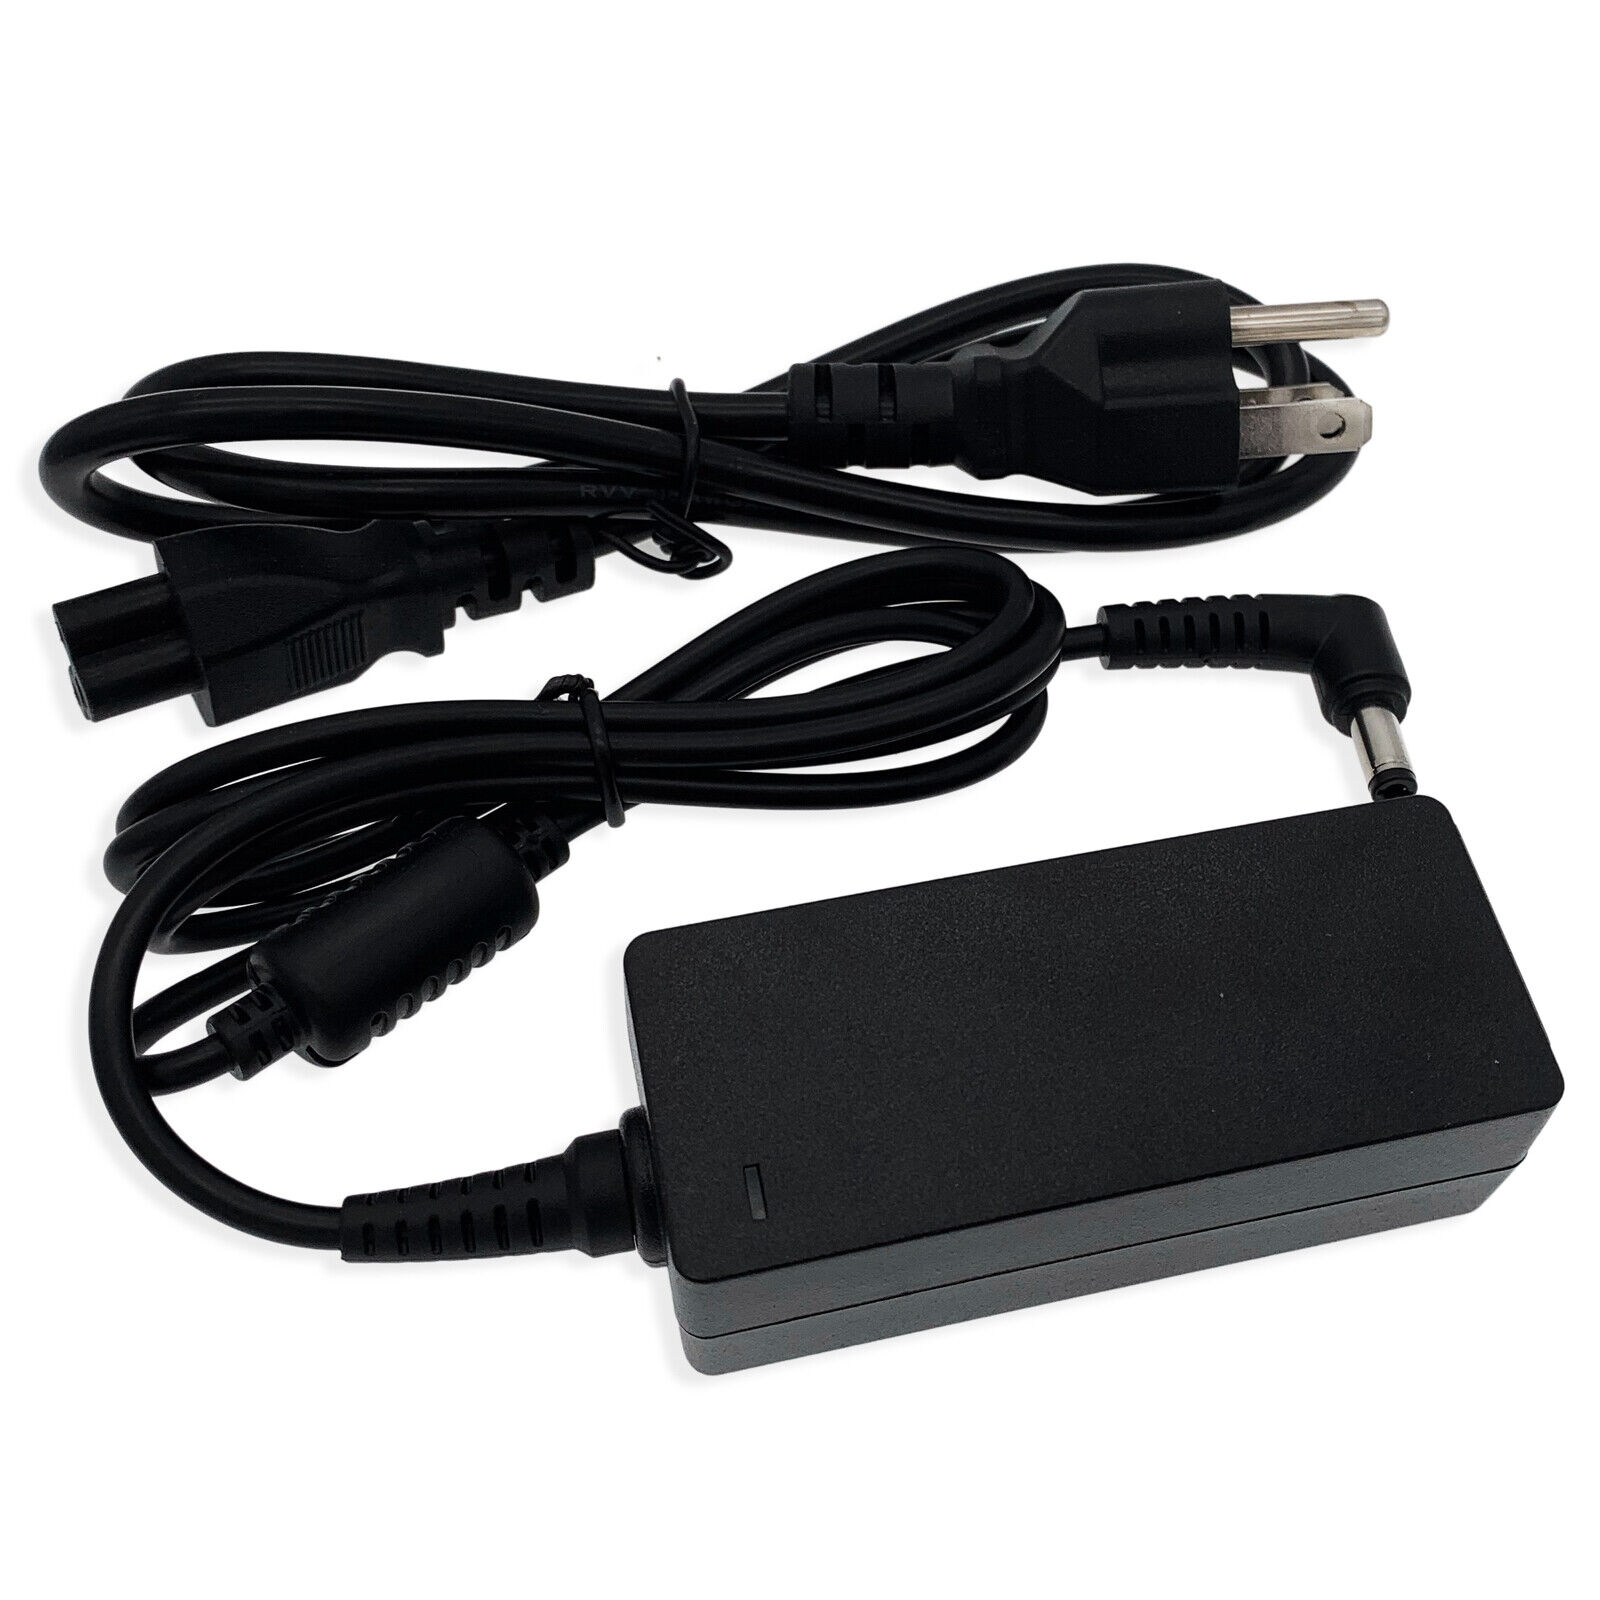 *Brand NEW*12V 3.5A 42W AC Adapter Genuine Arris Switch Mode NBS42C120350M2 OEM n/PC Power Supply